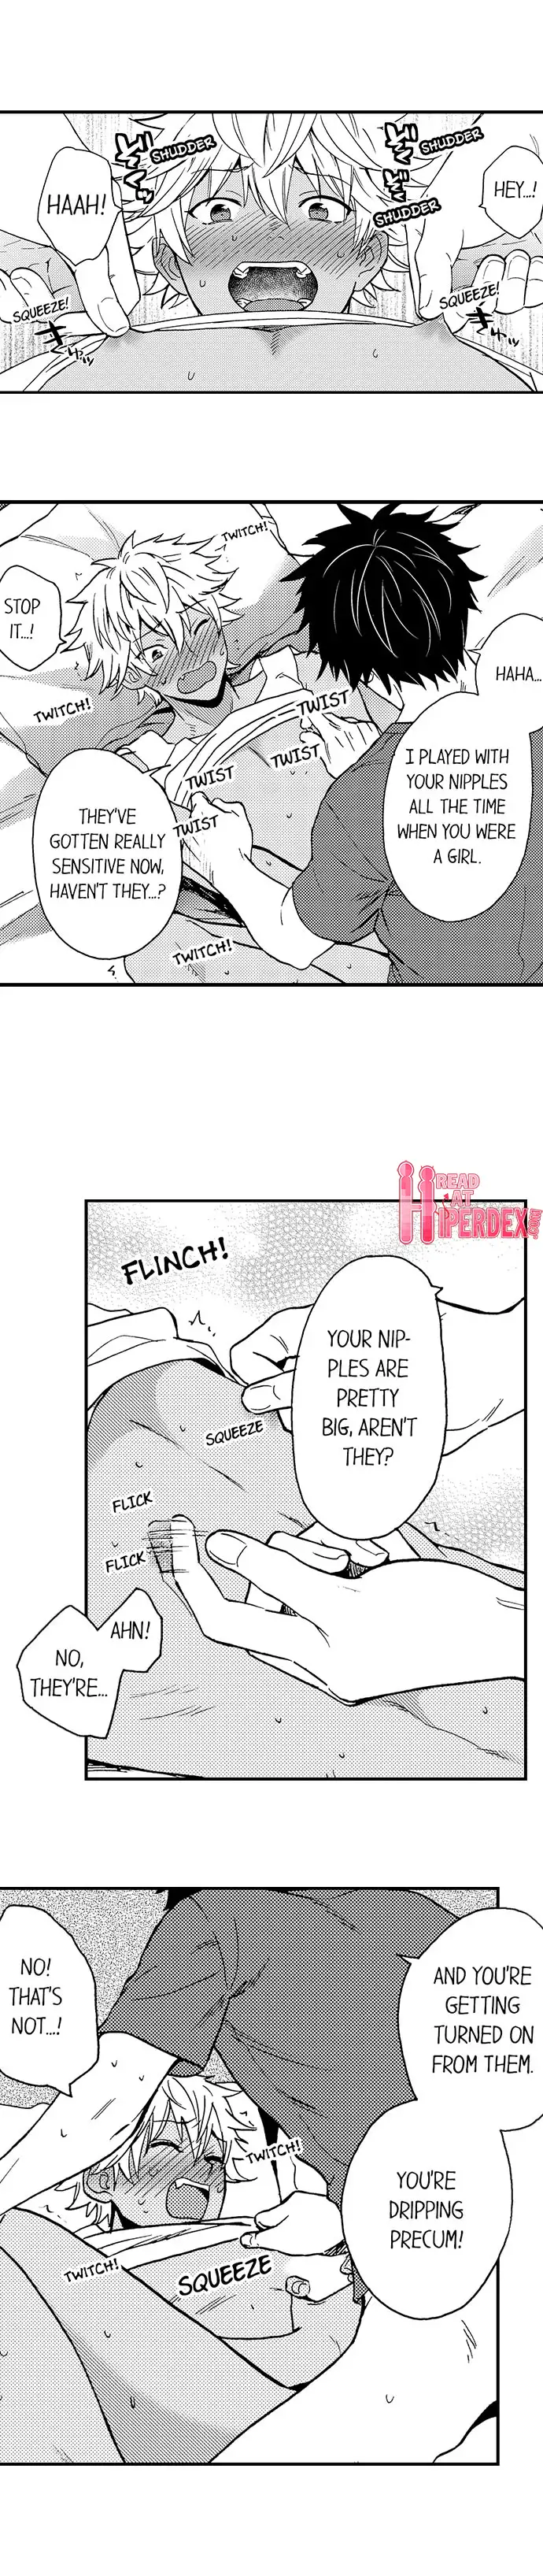 Fucked by My Best Friend - Chapter 7 Page 4